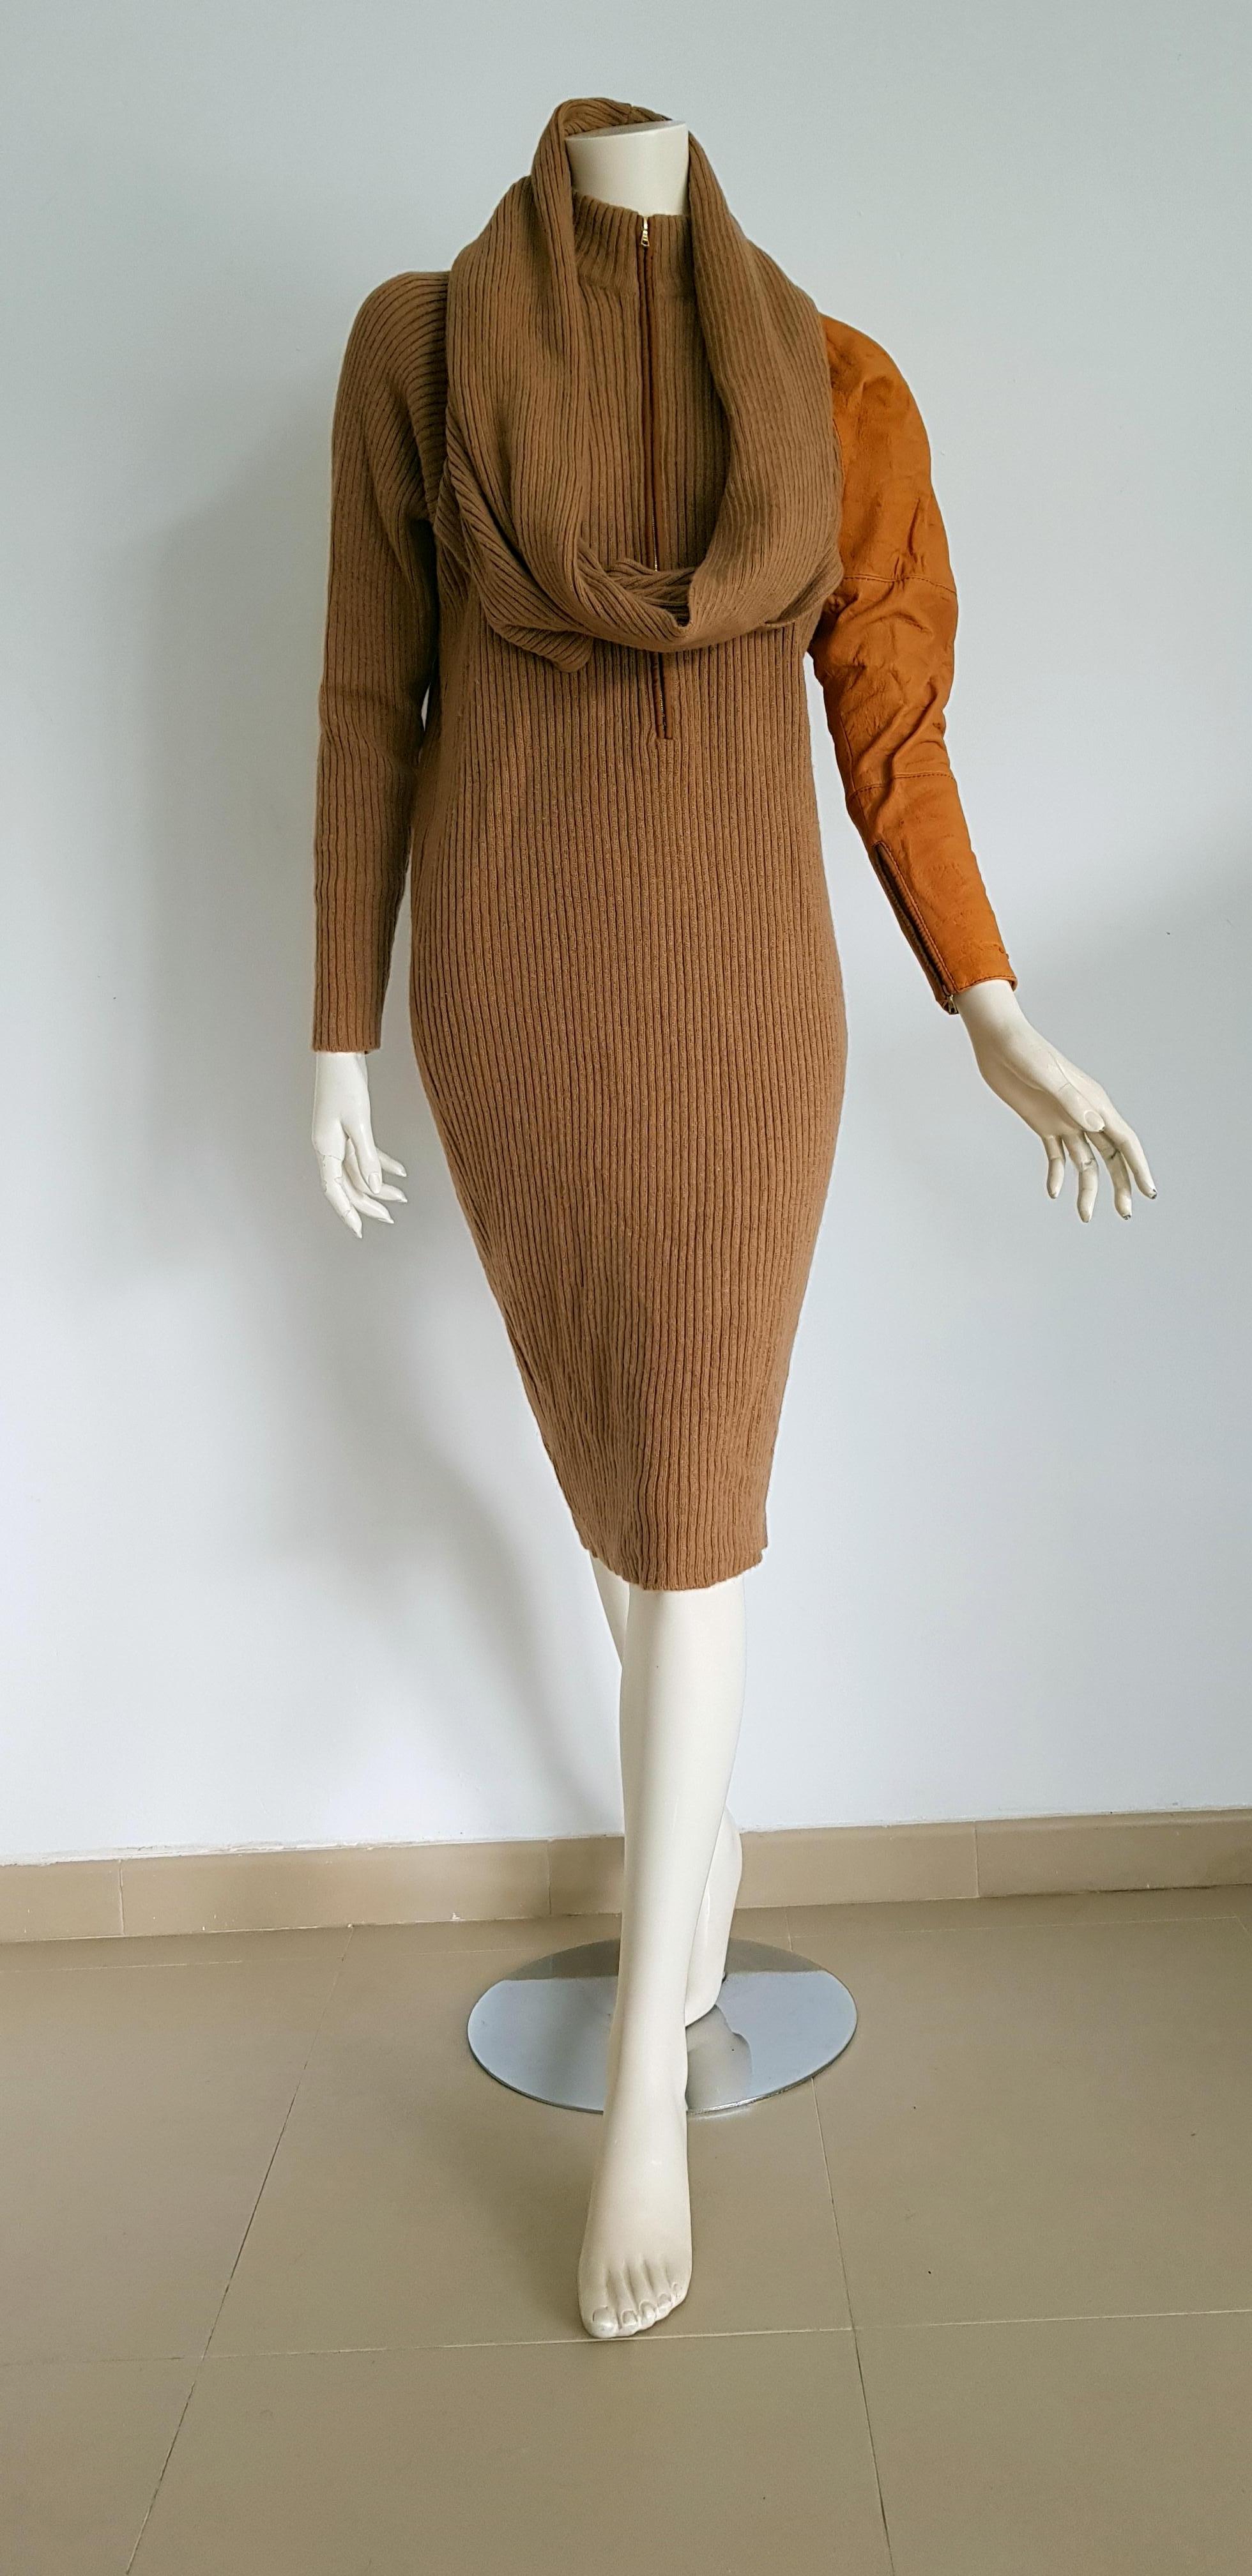 Gianfranco FERRE Couture, one deerskin sleeve, mesh camel dress. Scarf shaped as collar combined with the dress -  Unworn, New.  

SIZE: equivalent to about Small / Medium, please review approx measurements as follows in cm: lenght 112, chest